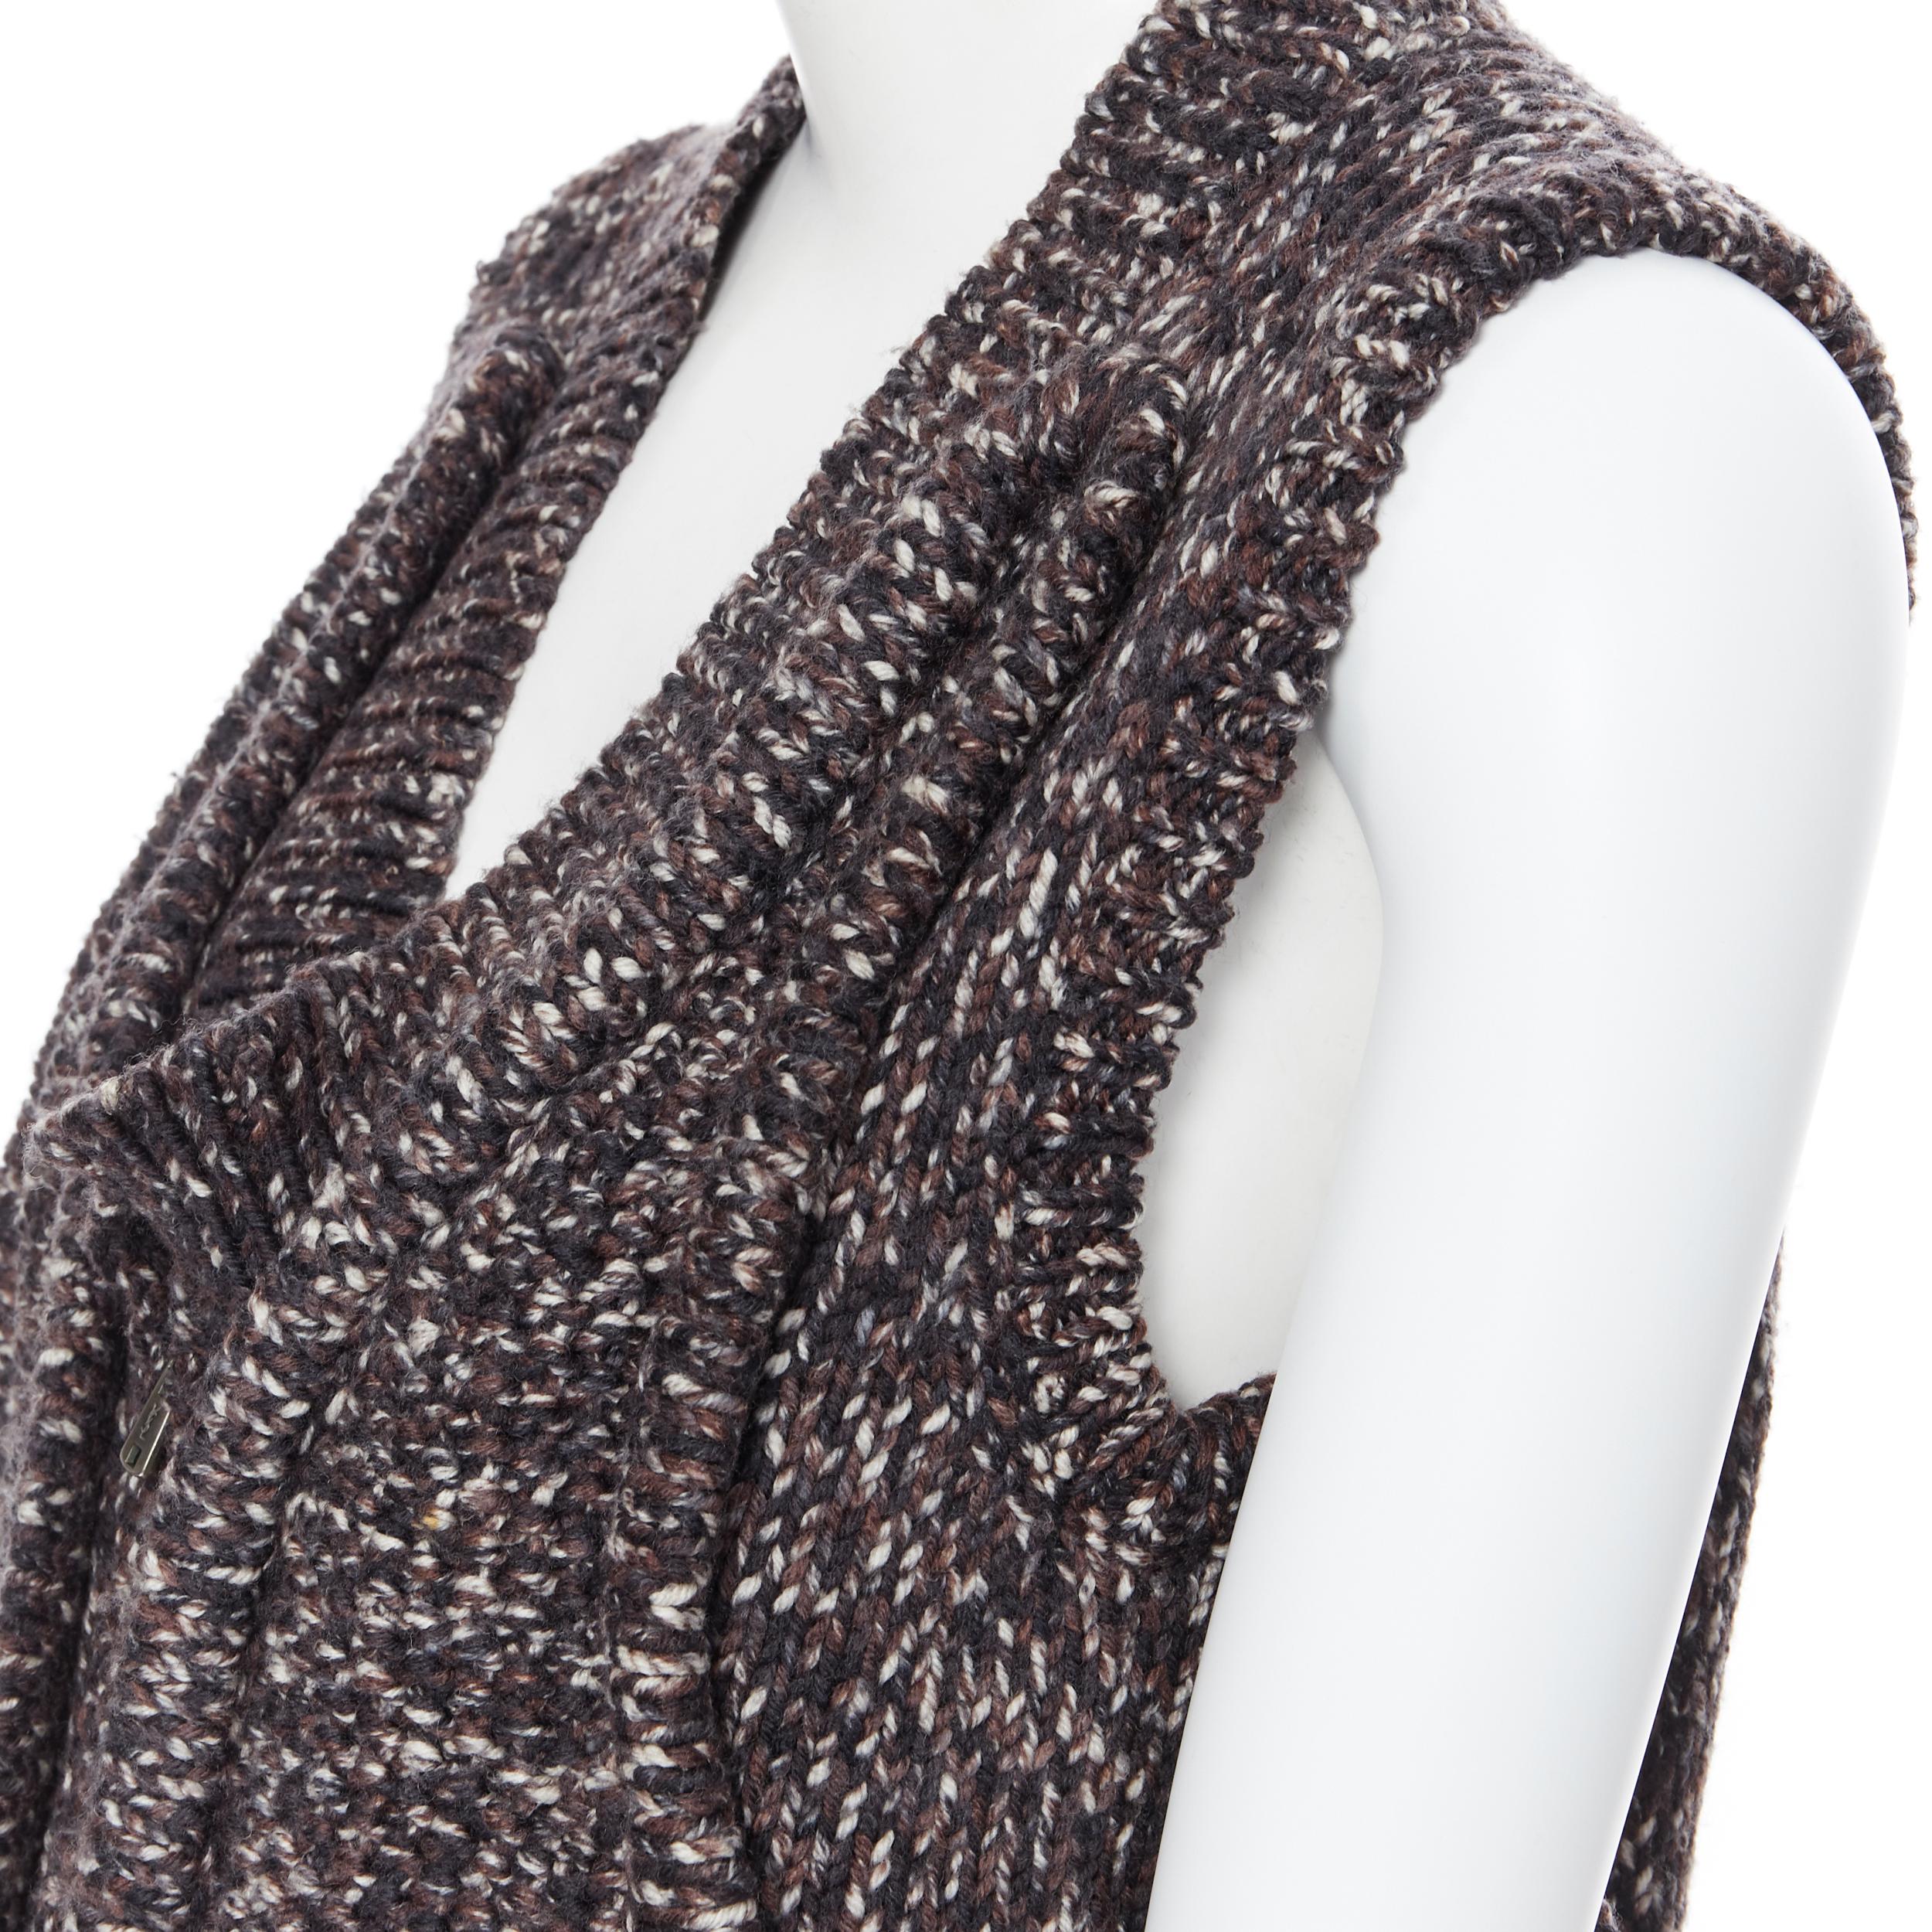 YVES SAINT LAURENT 100% wool brown cable knit zip front dual pocket vest  XS
Brand: Yves Saint Laurent
Model Name / Style: Knitted vest
Material: Wool
Color: Brown
Pattern: Solid
Extra Detail: Zip front closure.
Made in: Italy

CONDITION: